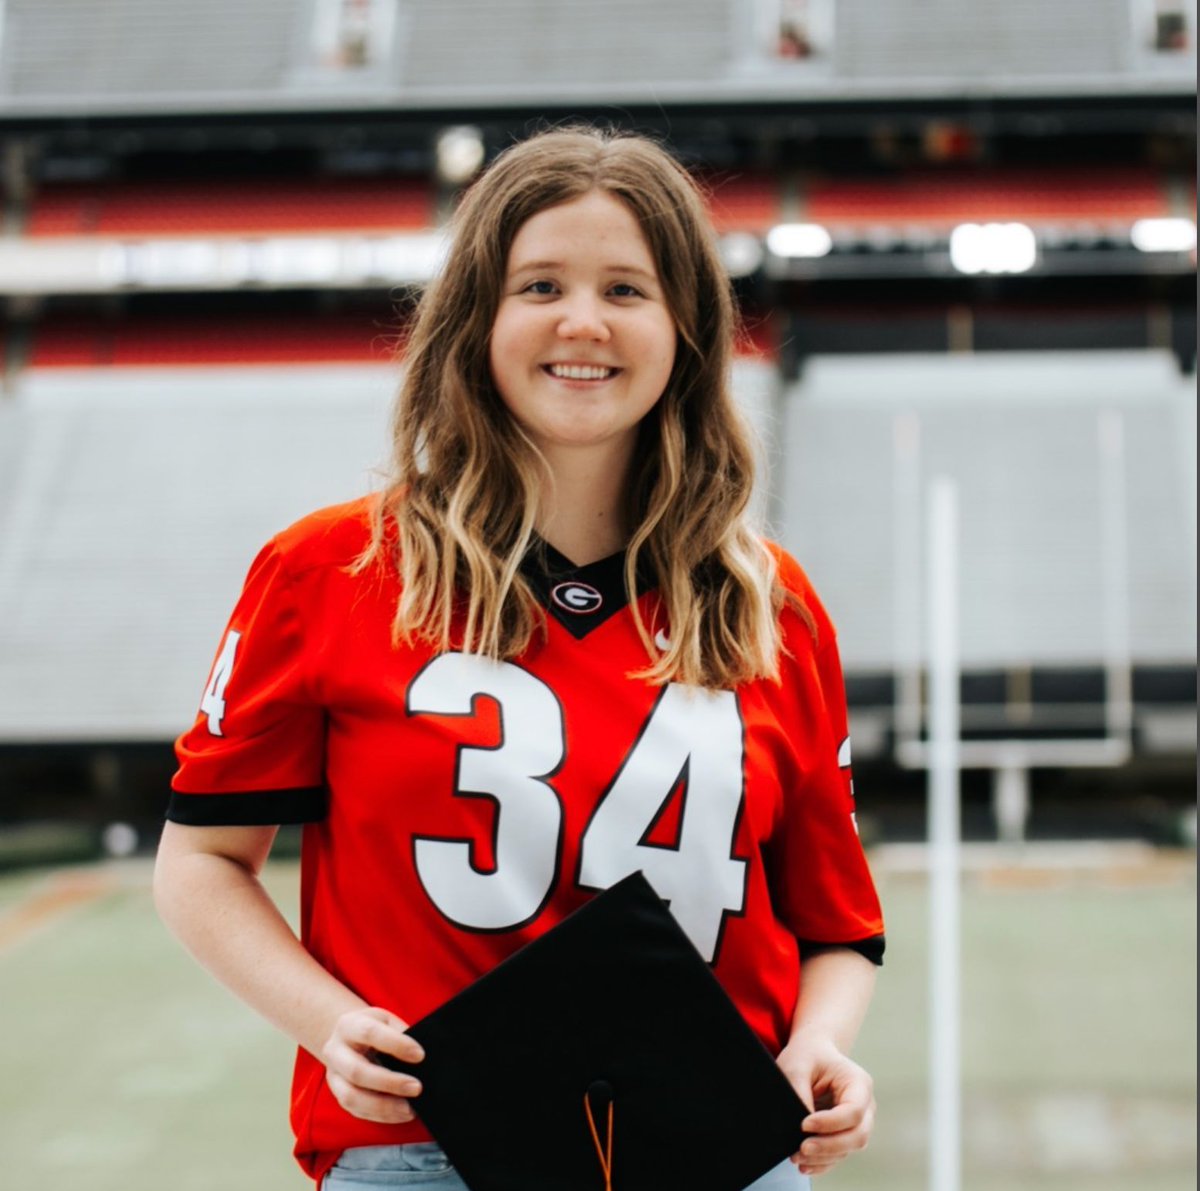 This Motivational FRIDAY is featuring Sydney Jones. Sydney has been involved with Community and Population Health initiatives since she was an undergraduate student at UGA. I look forward to seeing where her career takes her! Thank you for being an asset to our campus, Sydney!